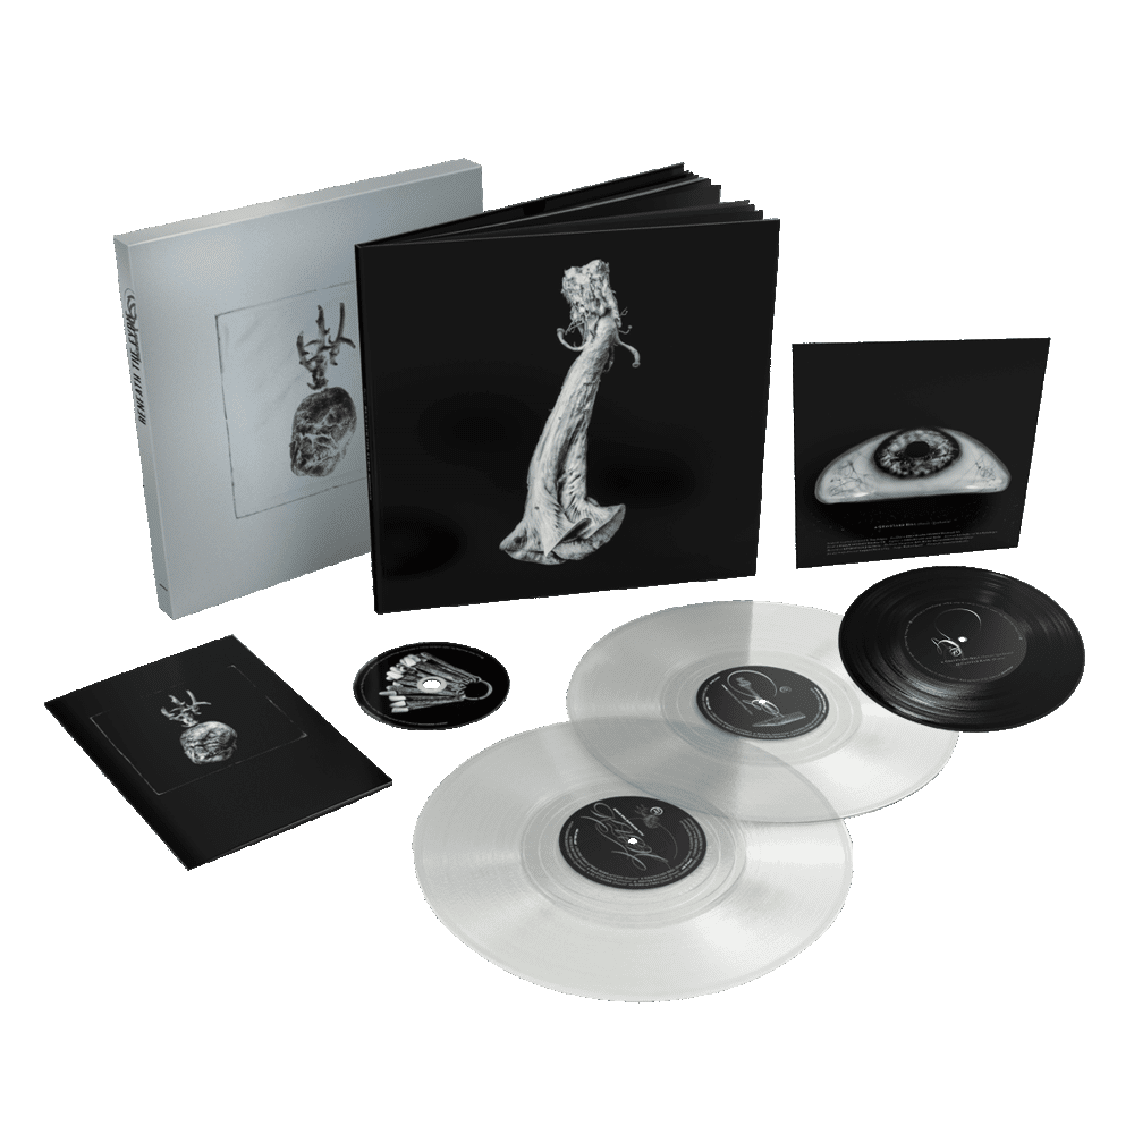 Pixies to launch 'Beneath the Eyrie' boxset including an exclusive double A side 7 inch vinyl